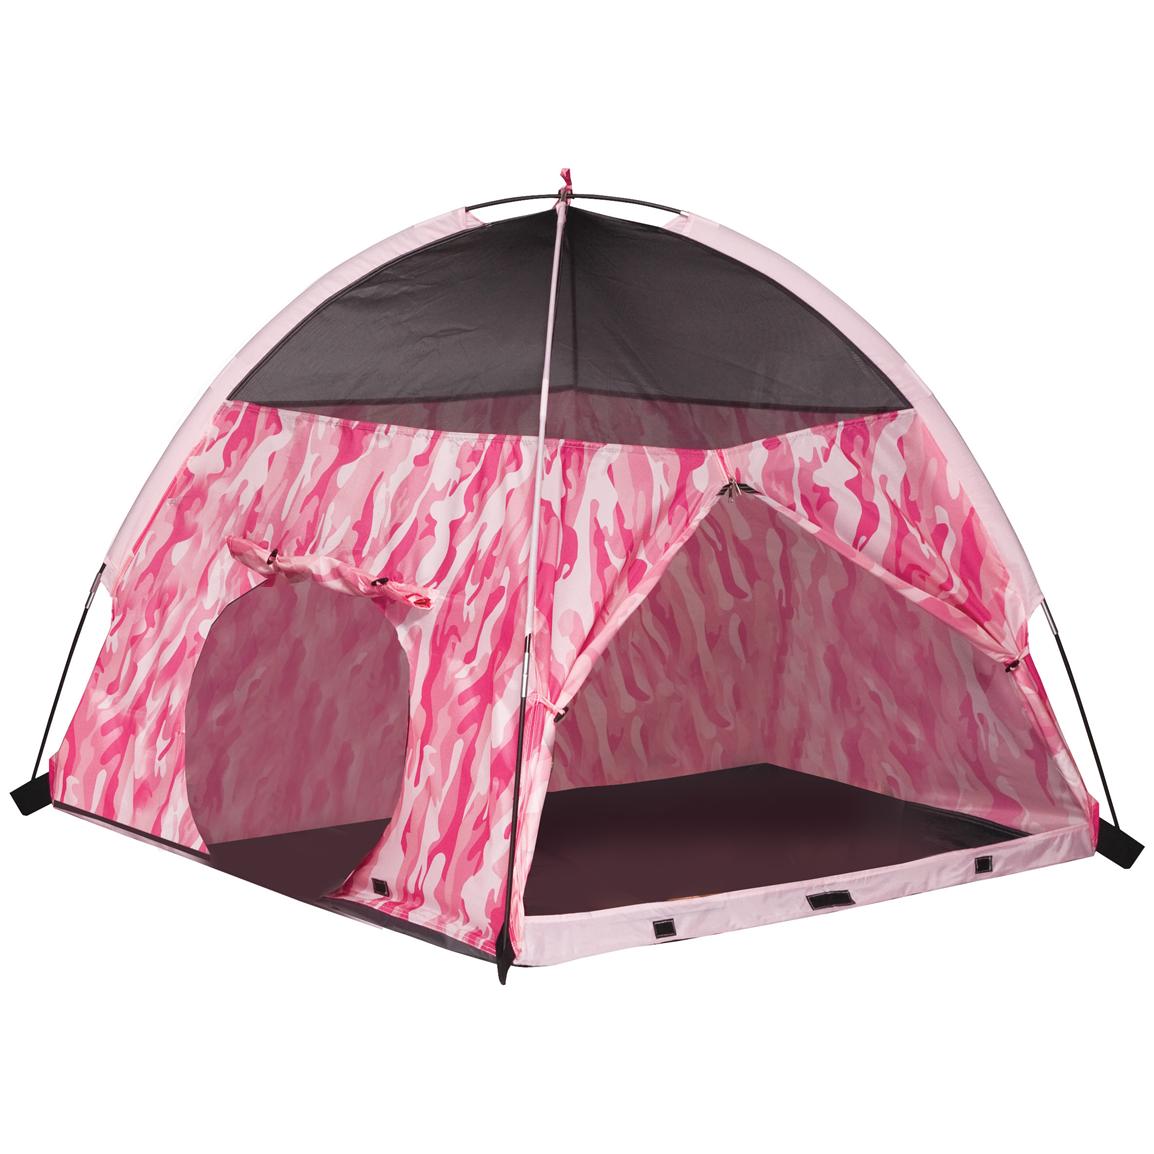 Pacific Play Tents Pink Camo Tent Tunnel Combo  514849, Toys